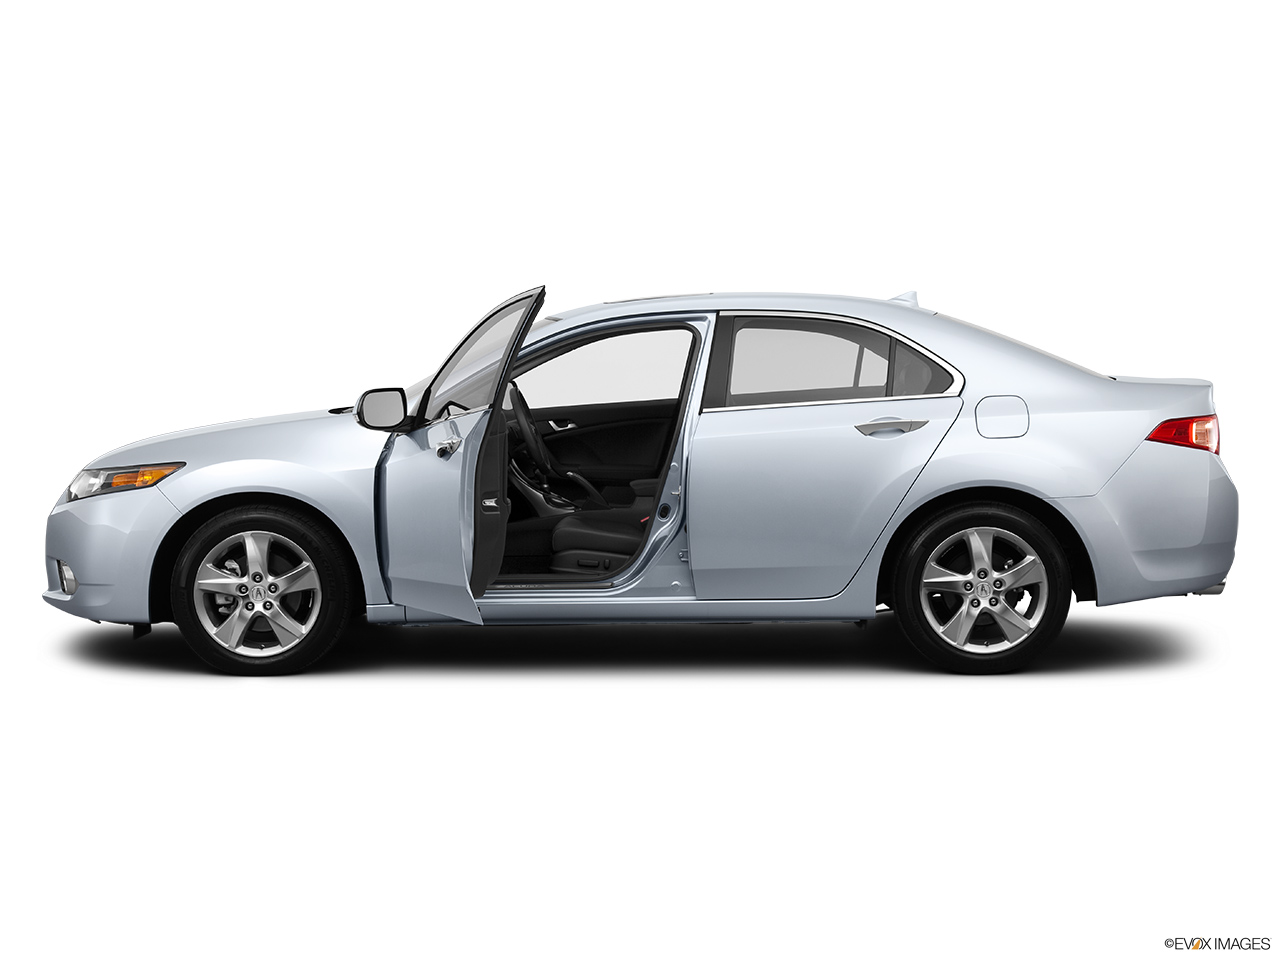 2013 Acura TSX 5-Speed Automatic Driver's side profile with drivers side door open. 